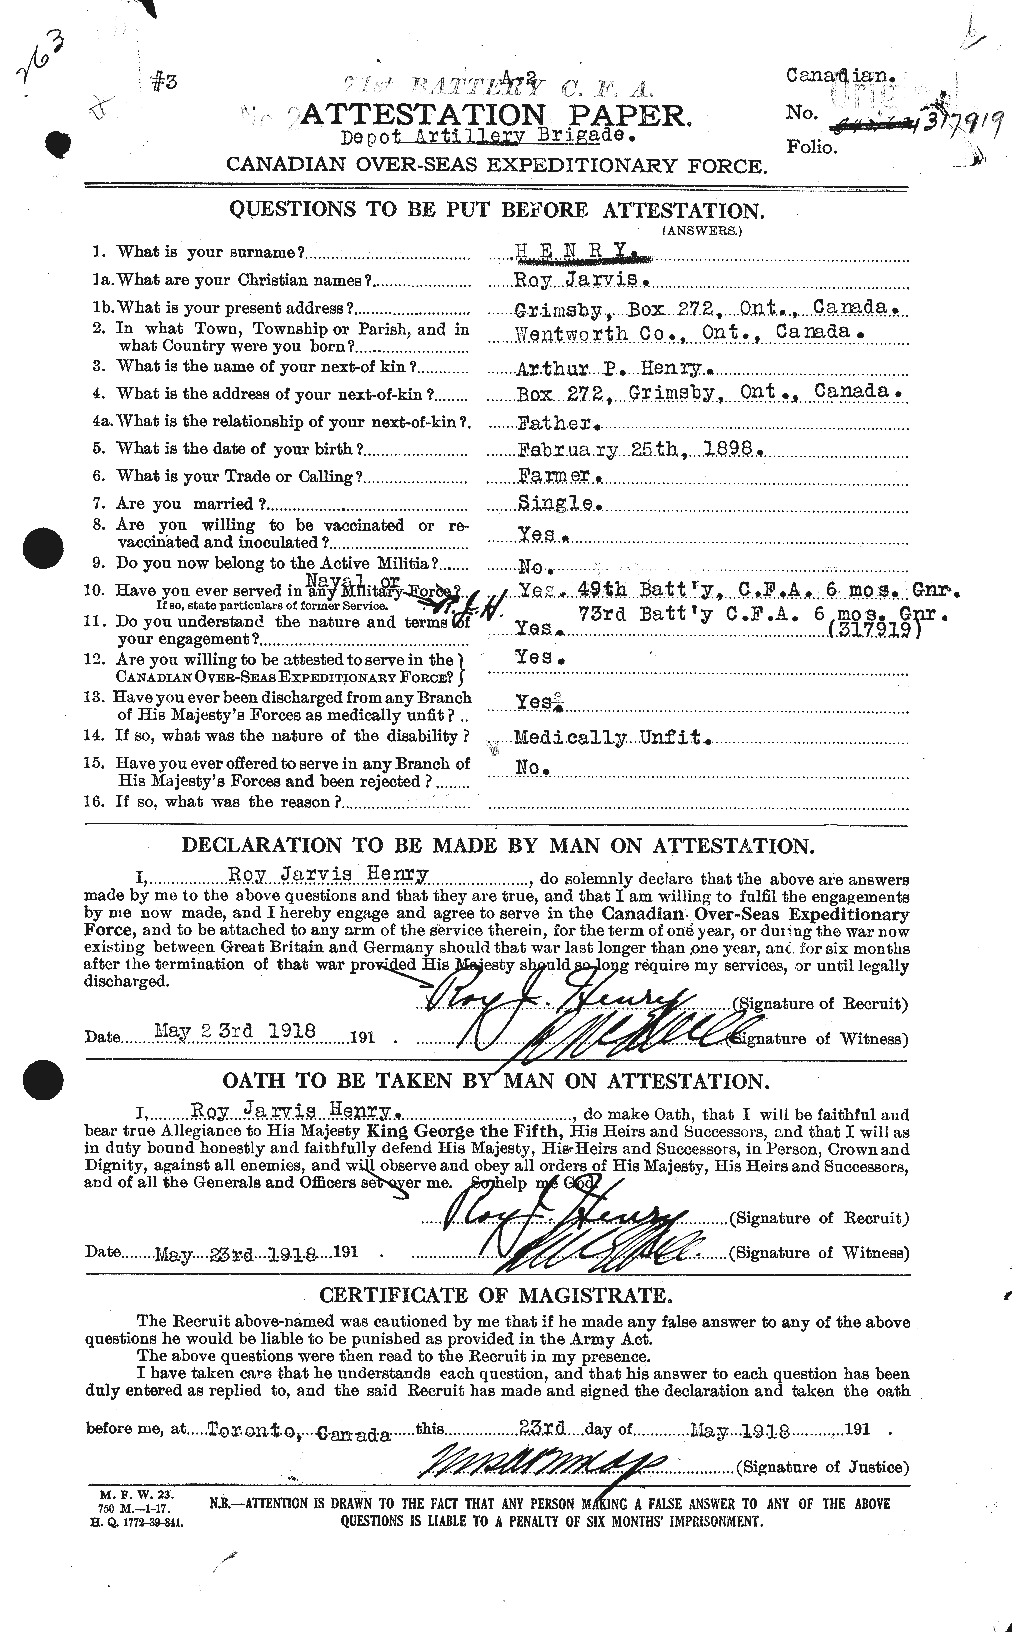 Personnel Records of the First World War - CEF 387722a